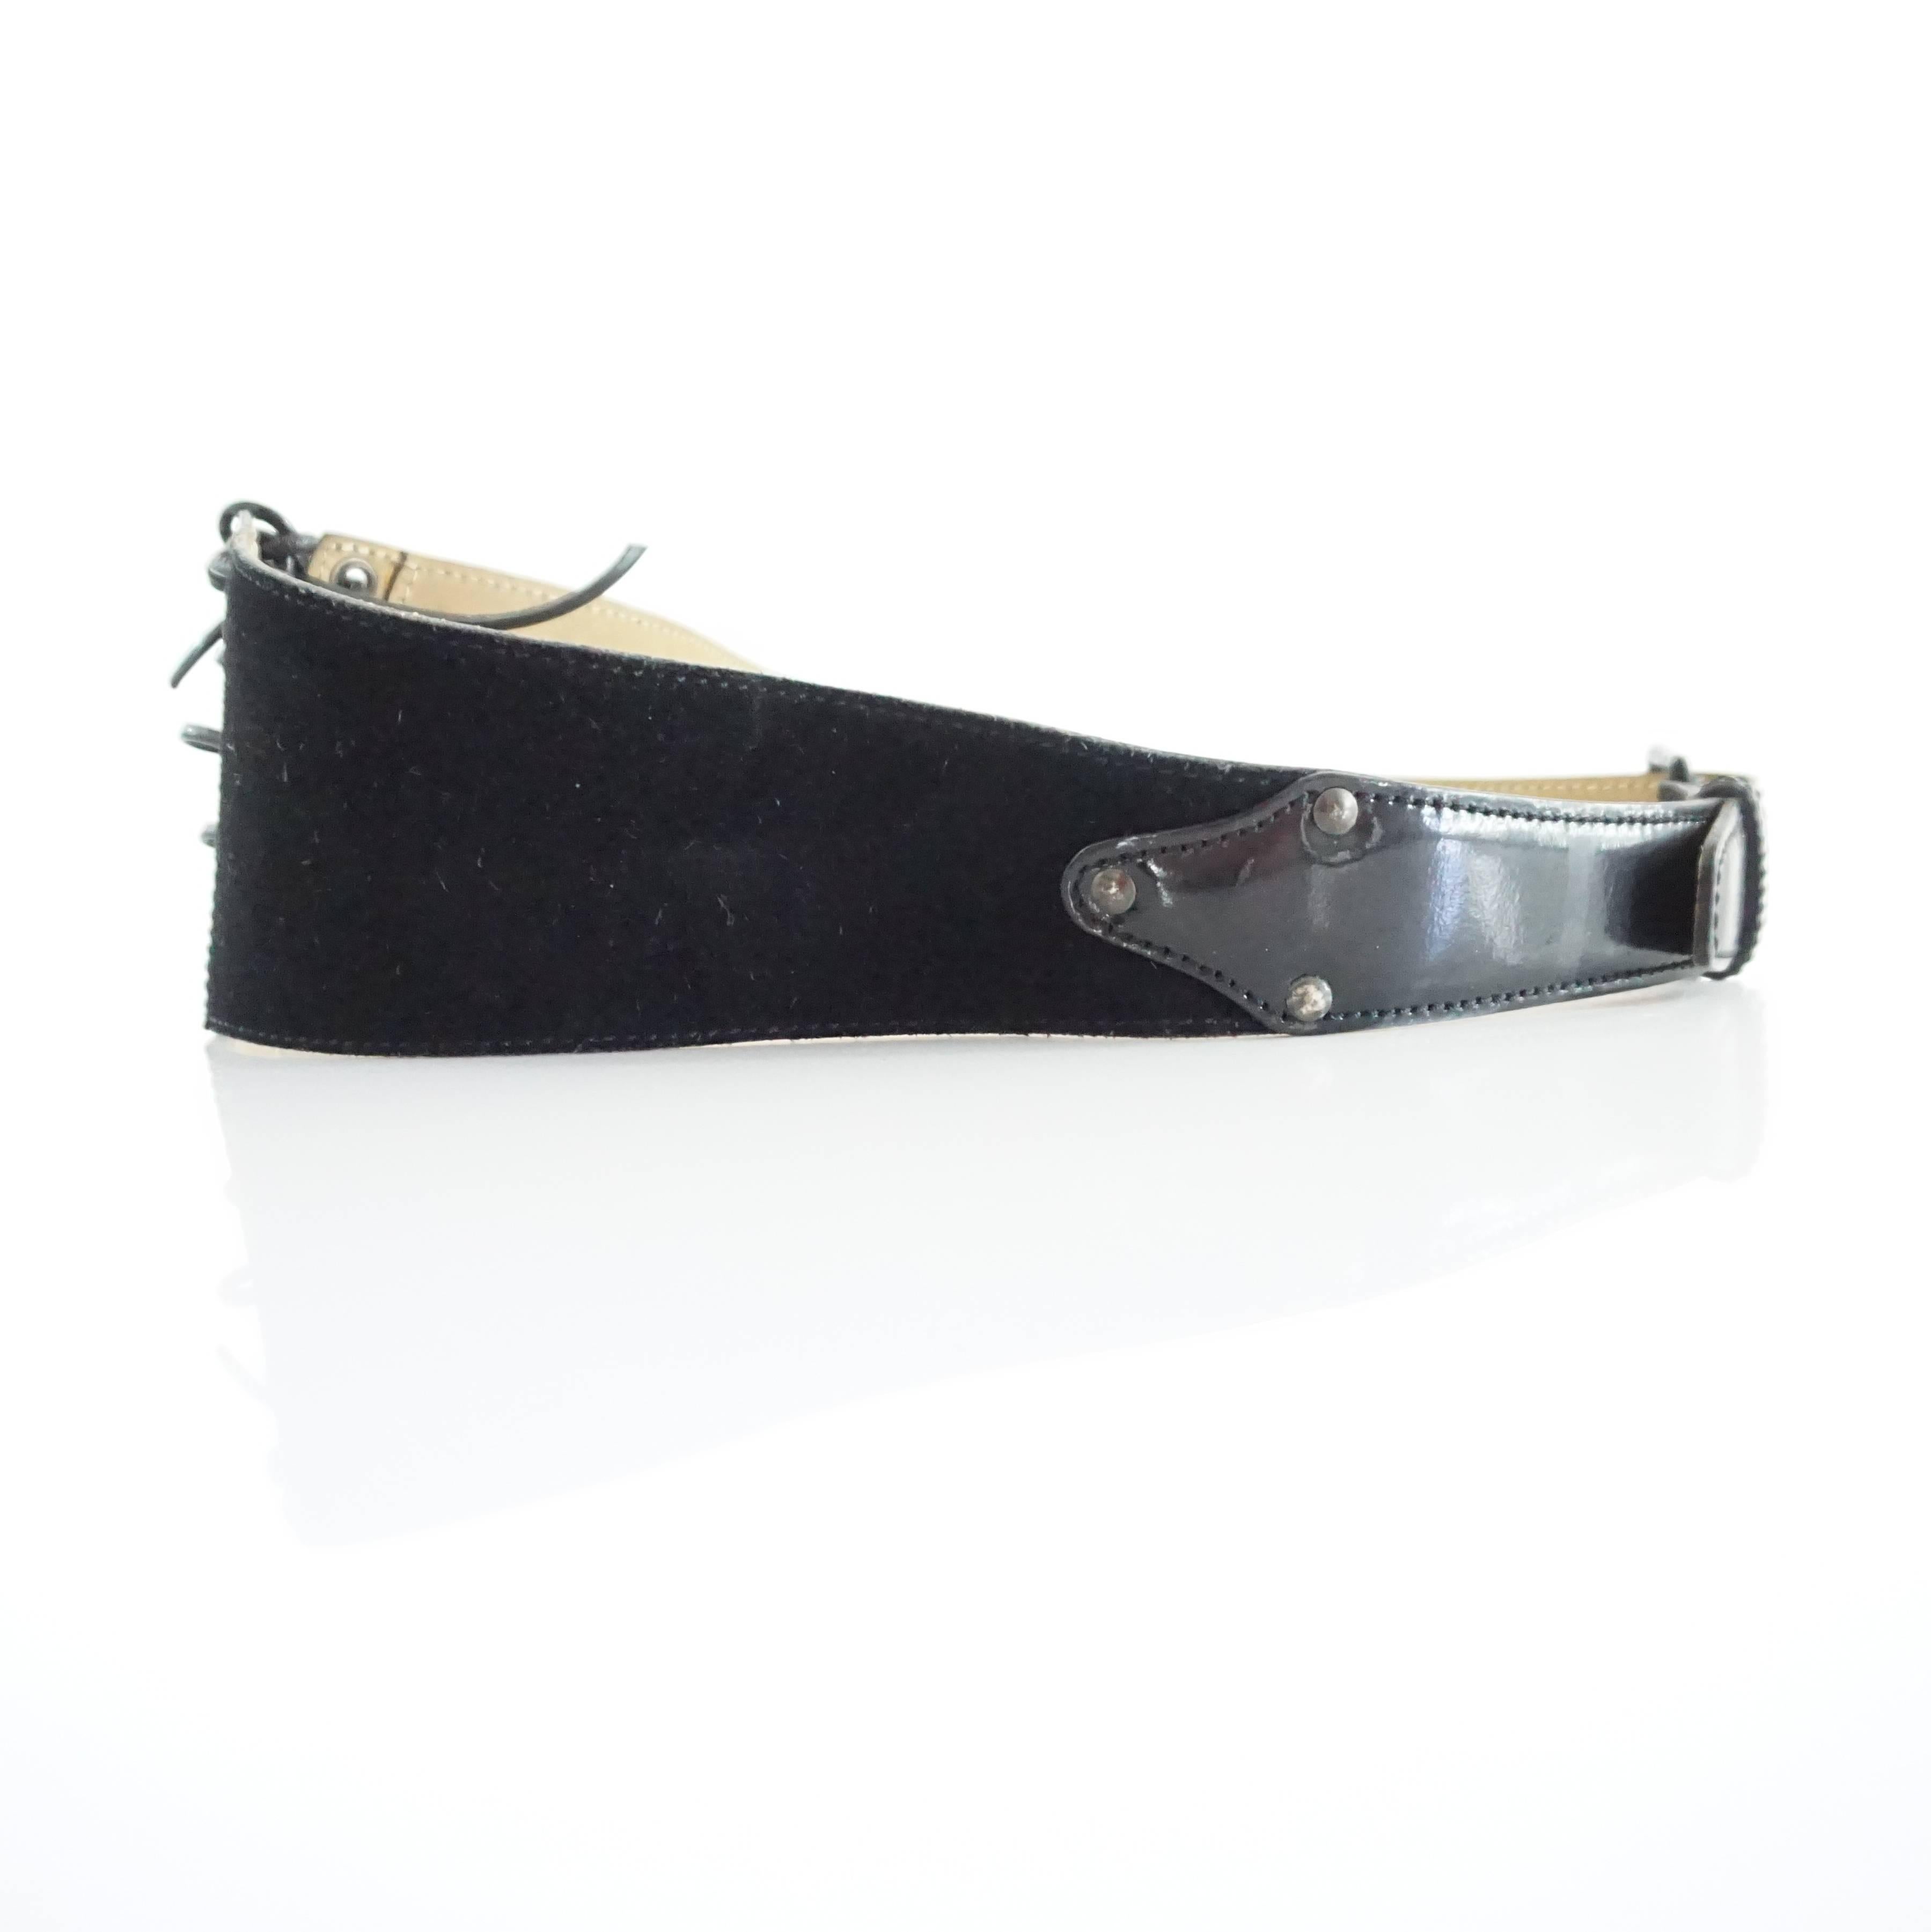 This Alaia belt is suede with a patent leather front. It has a angular look and lace-up front closure. The piece is in fair condition with some wear to the laces, belt strap, and interior as seen in the images. Additionally the belt looks somewhat